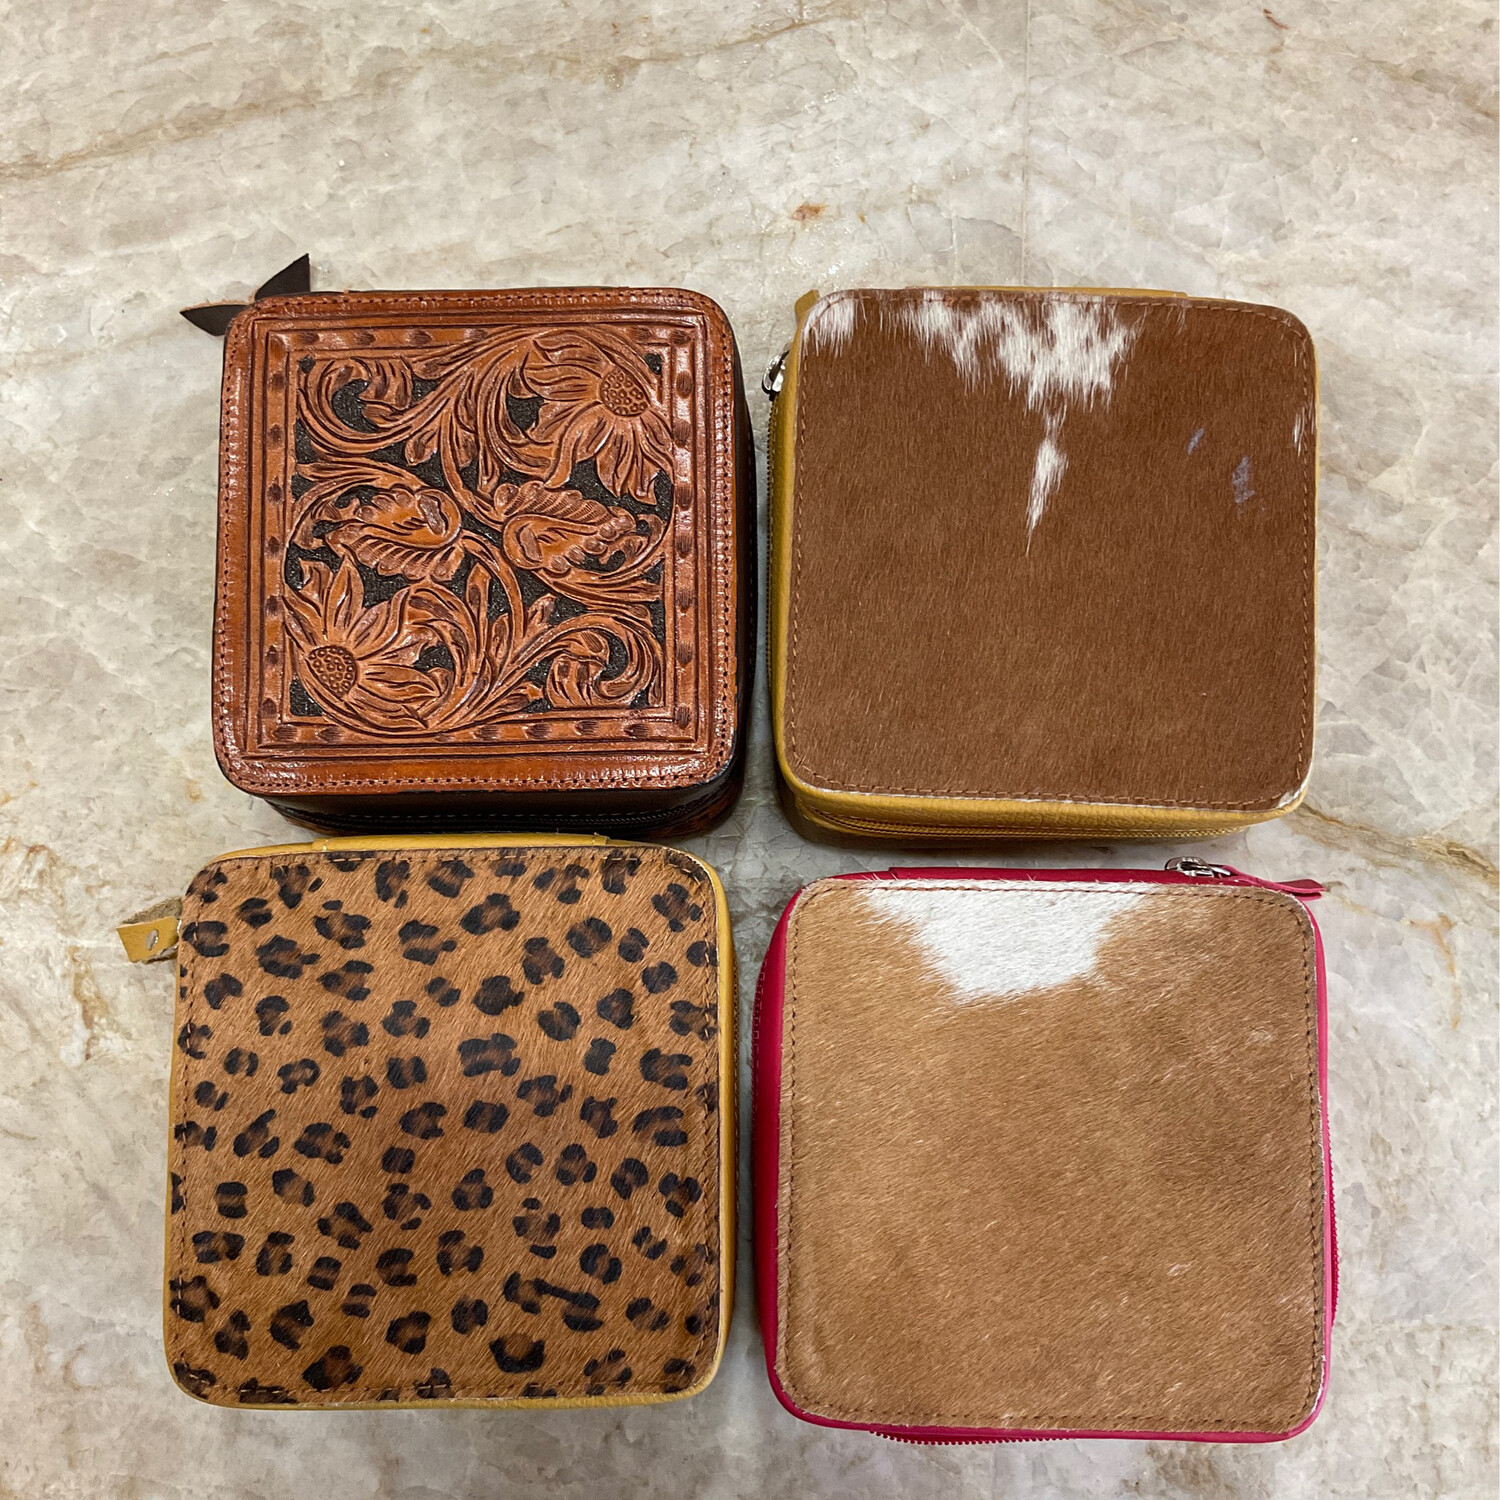 Accessories To Go Jewelry Leather Boxes 